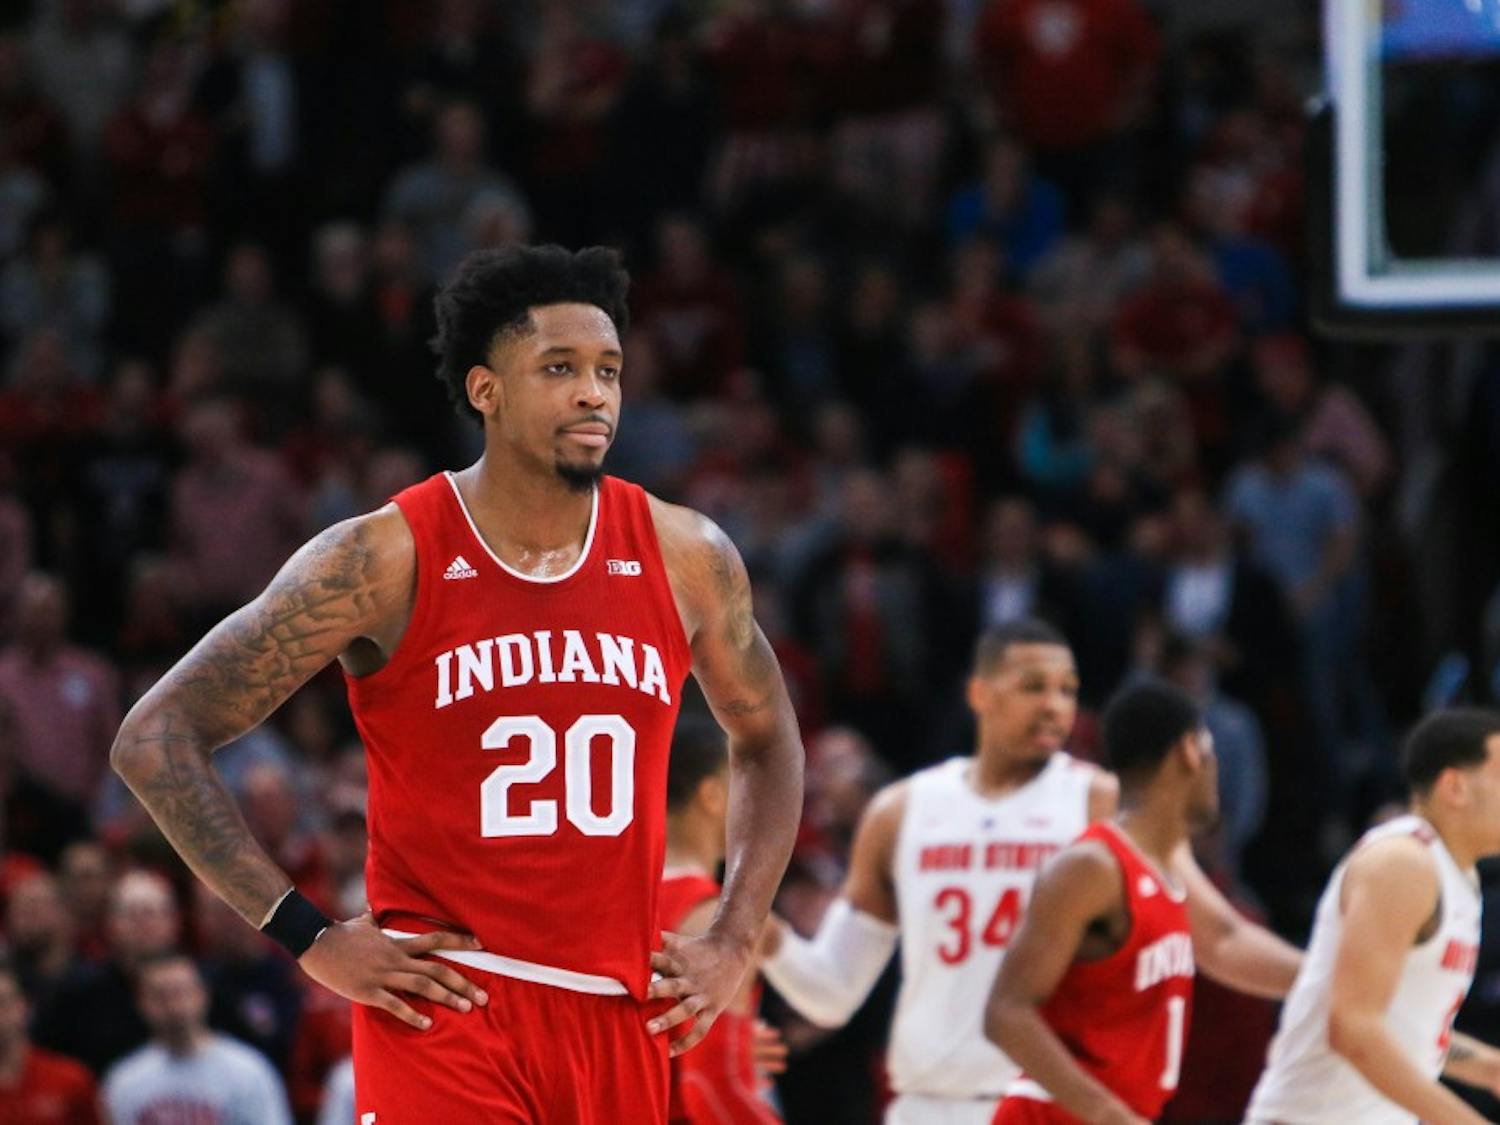 GALLERY: The Hoosiers lose against the Buckeyes in the Big Ten Tournament